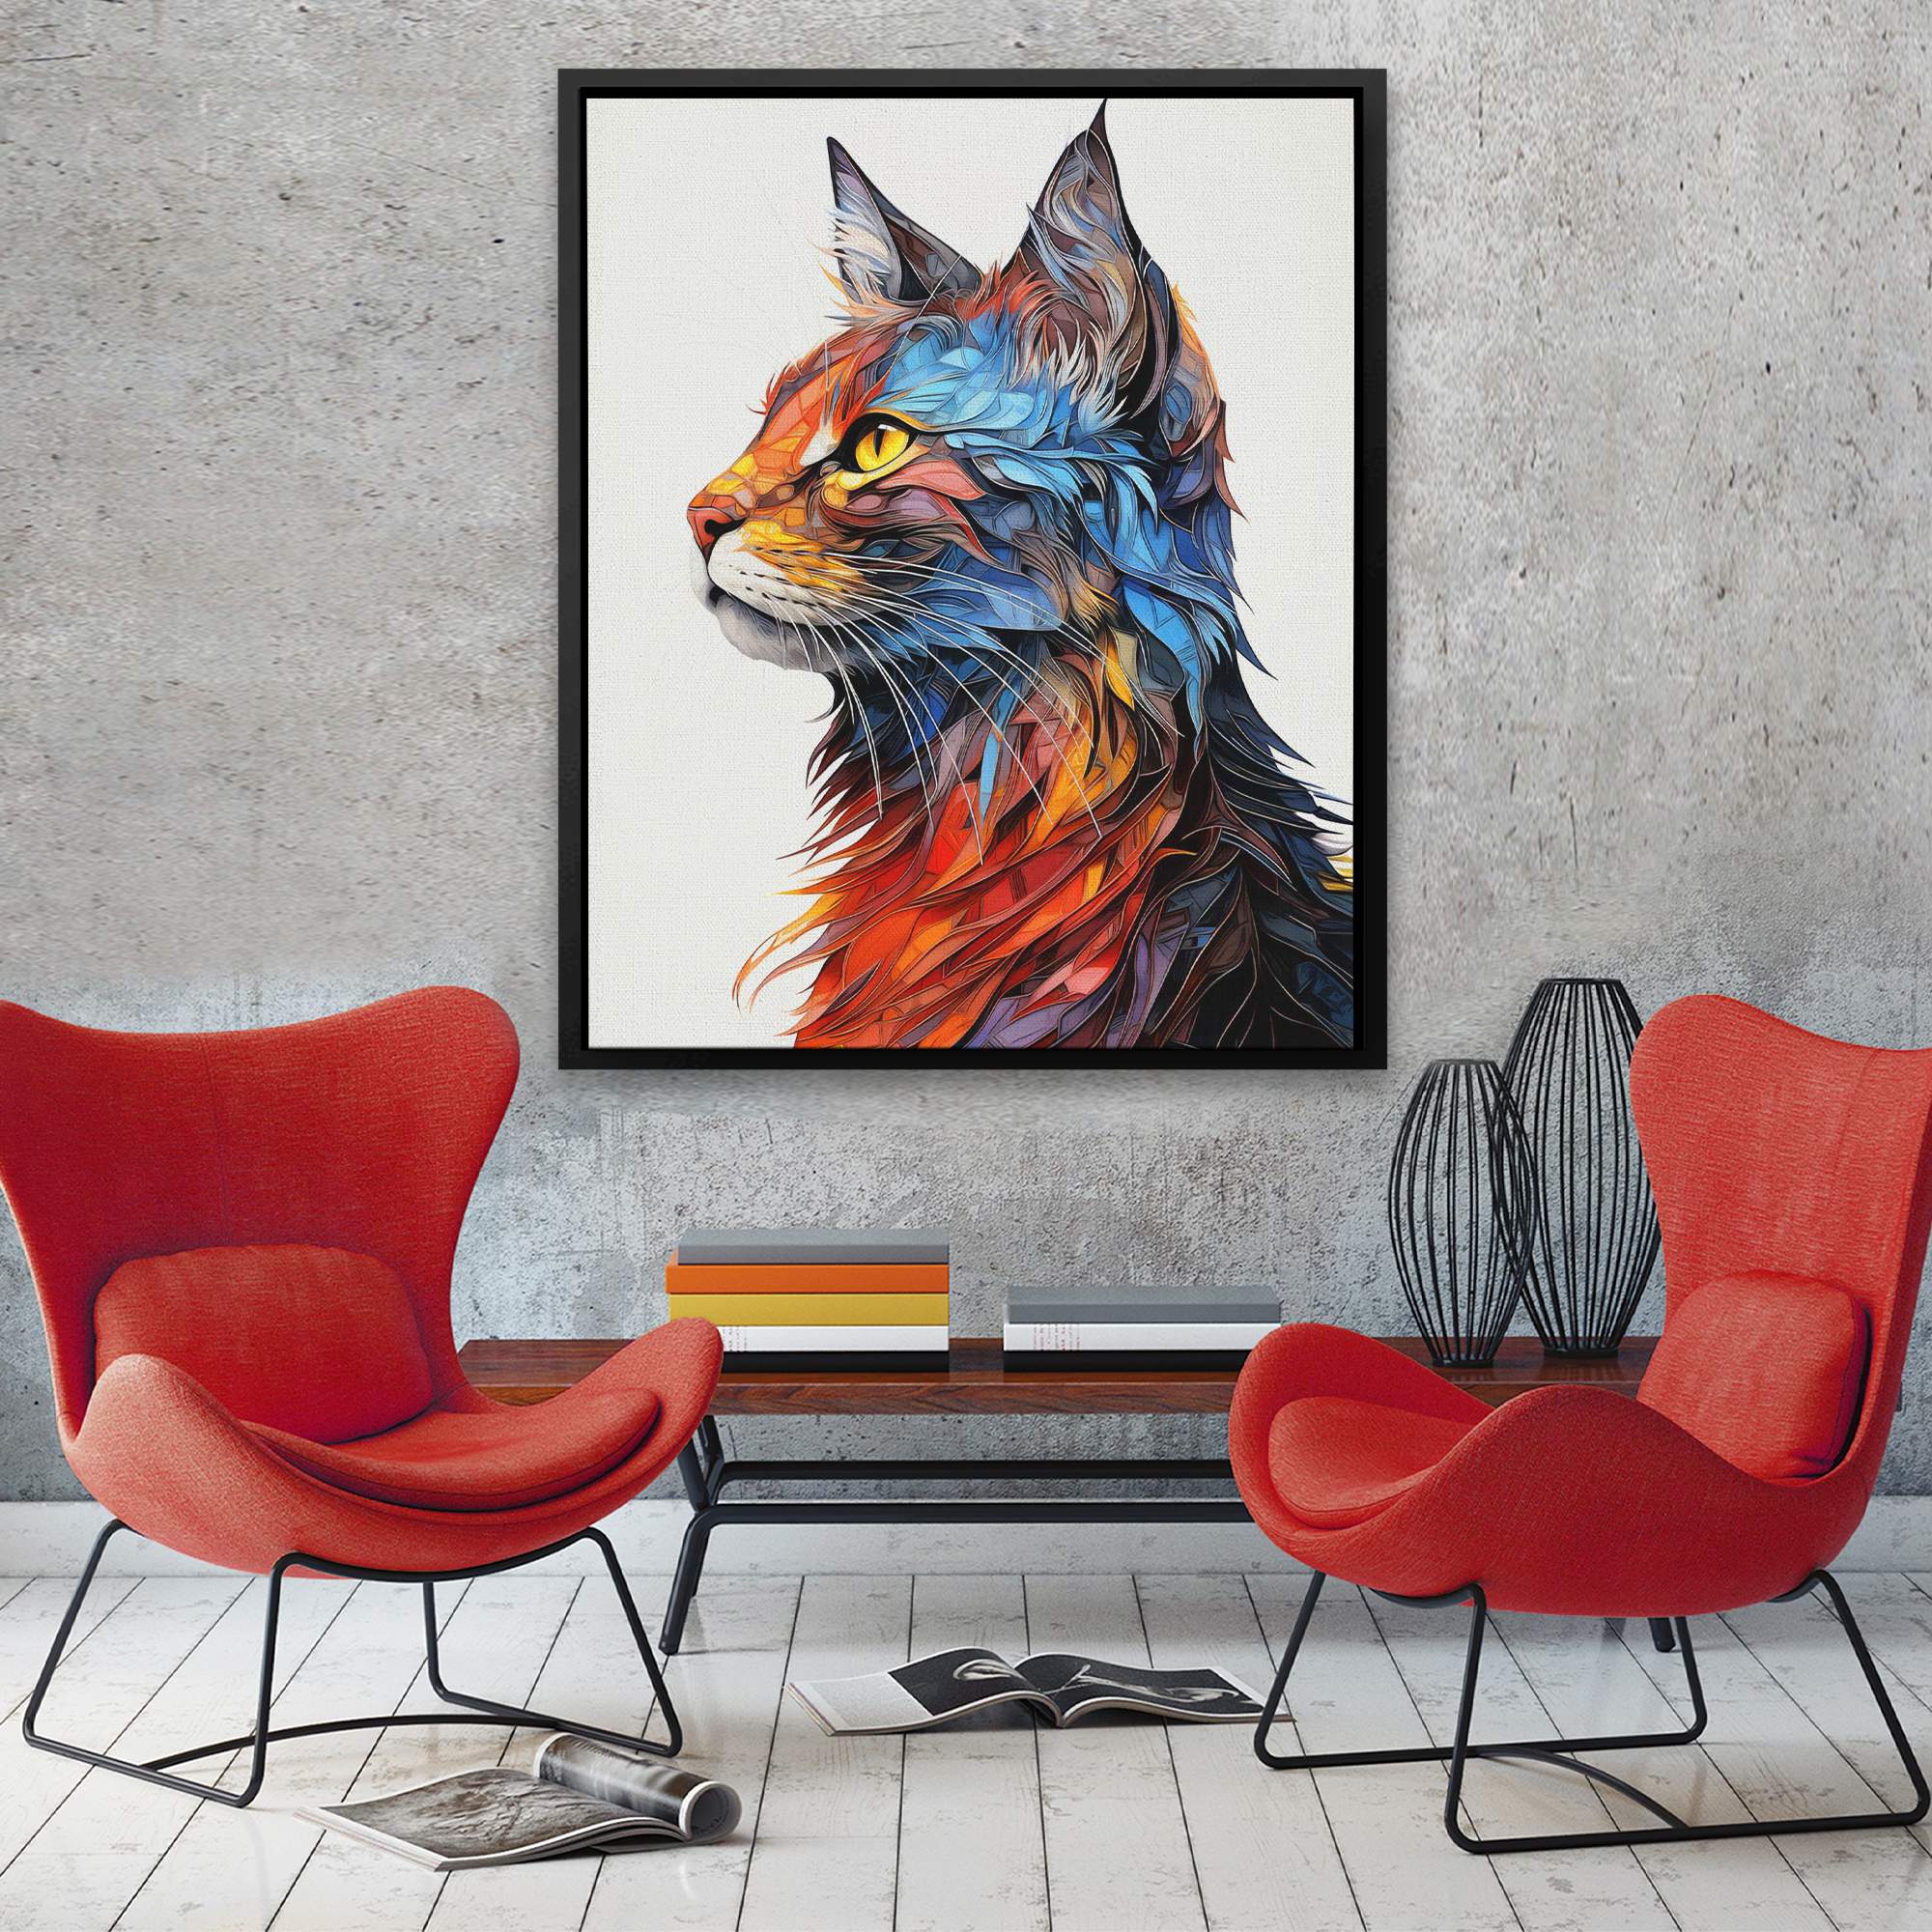 a painting of a colorful cat on a white background